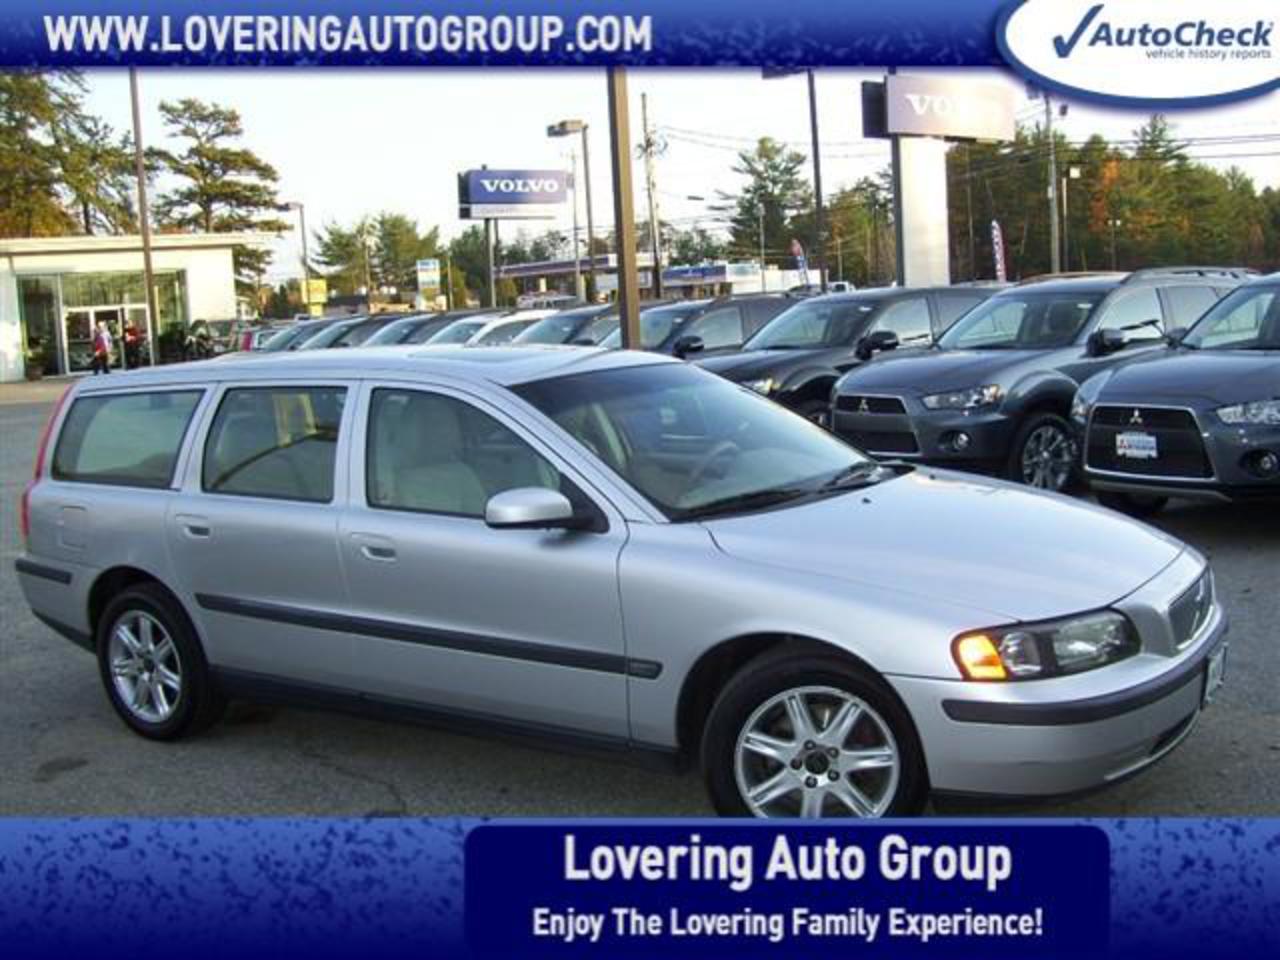 Volvo V70 ASR. View Download Wallpaper. 640x480. Comments